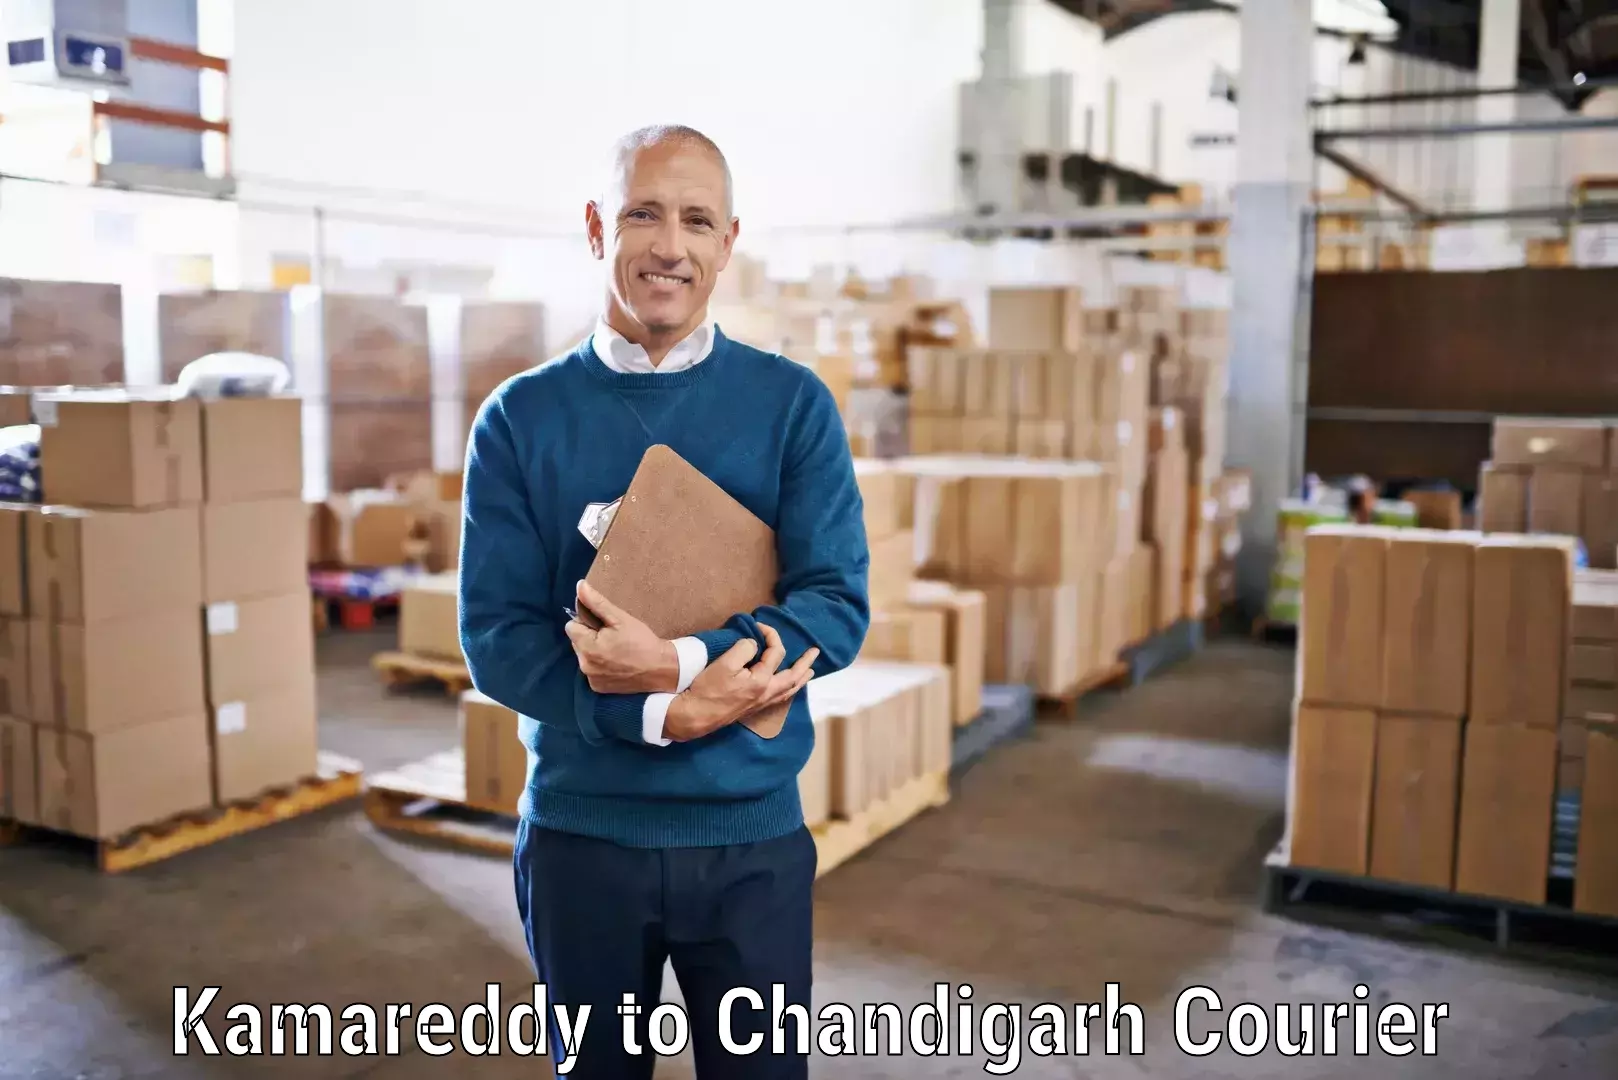 Reliable package handling Kamareddy to Chandigarh